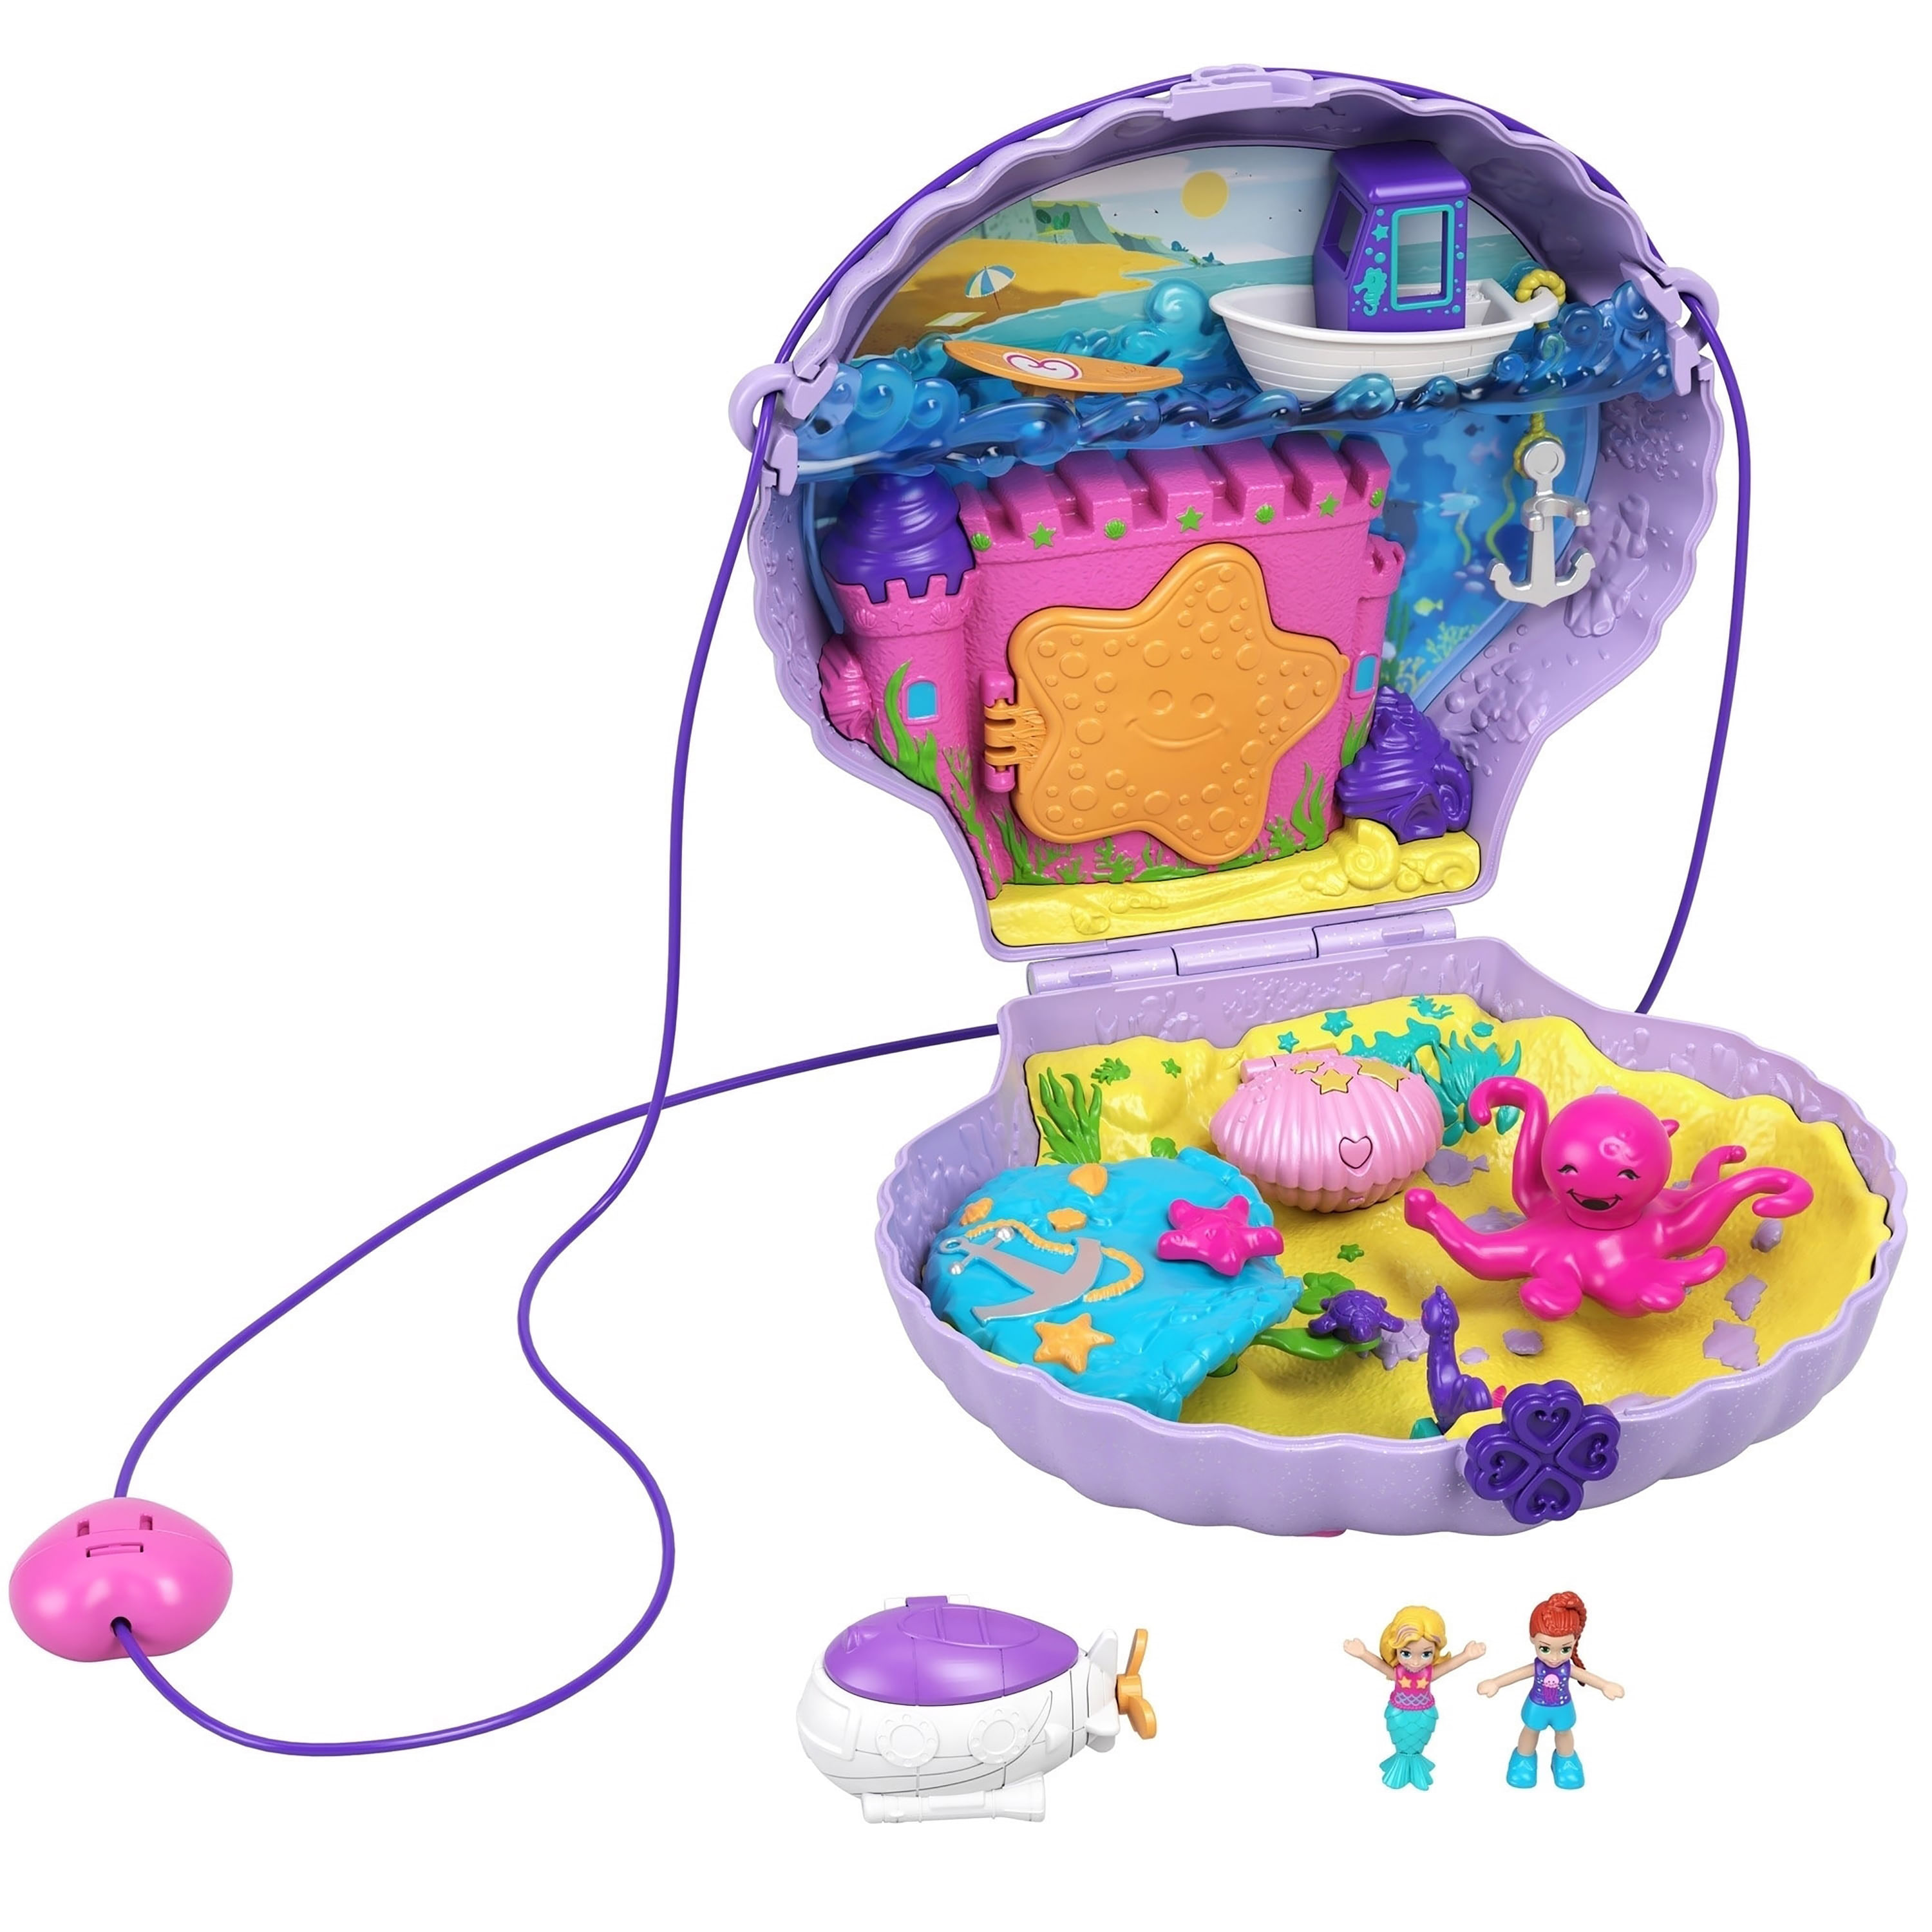 Polly Pocket Compact Play Sets for sale in Algiers, Algeria